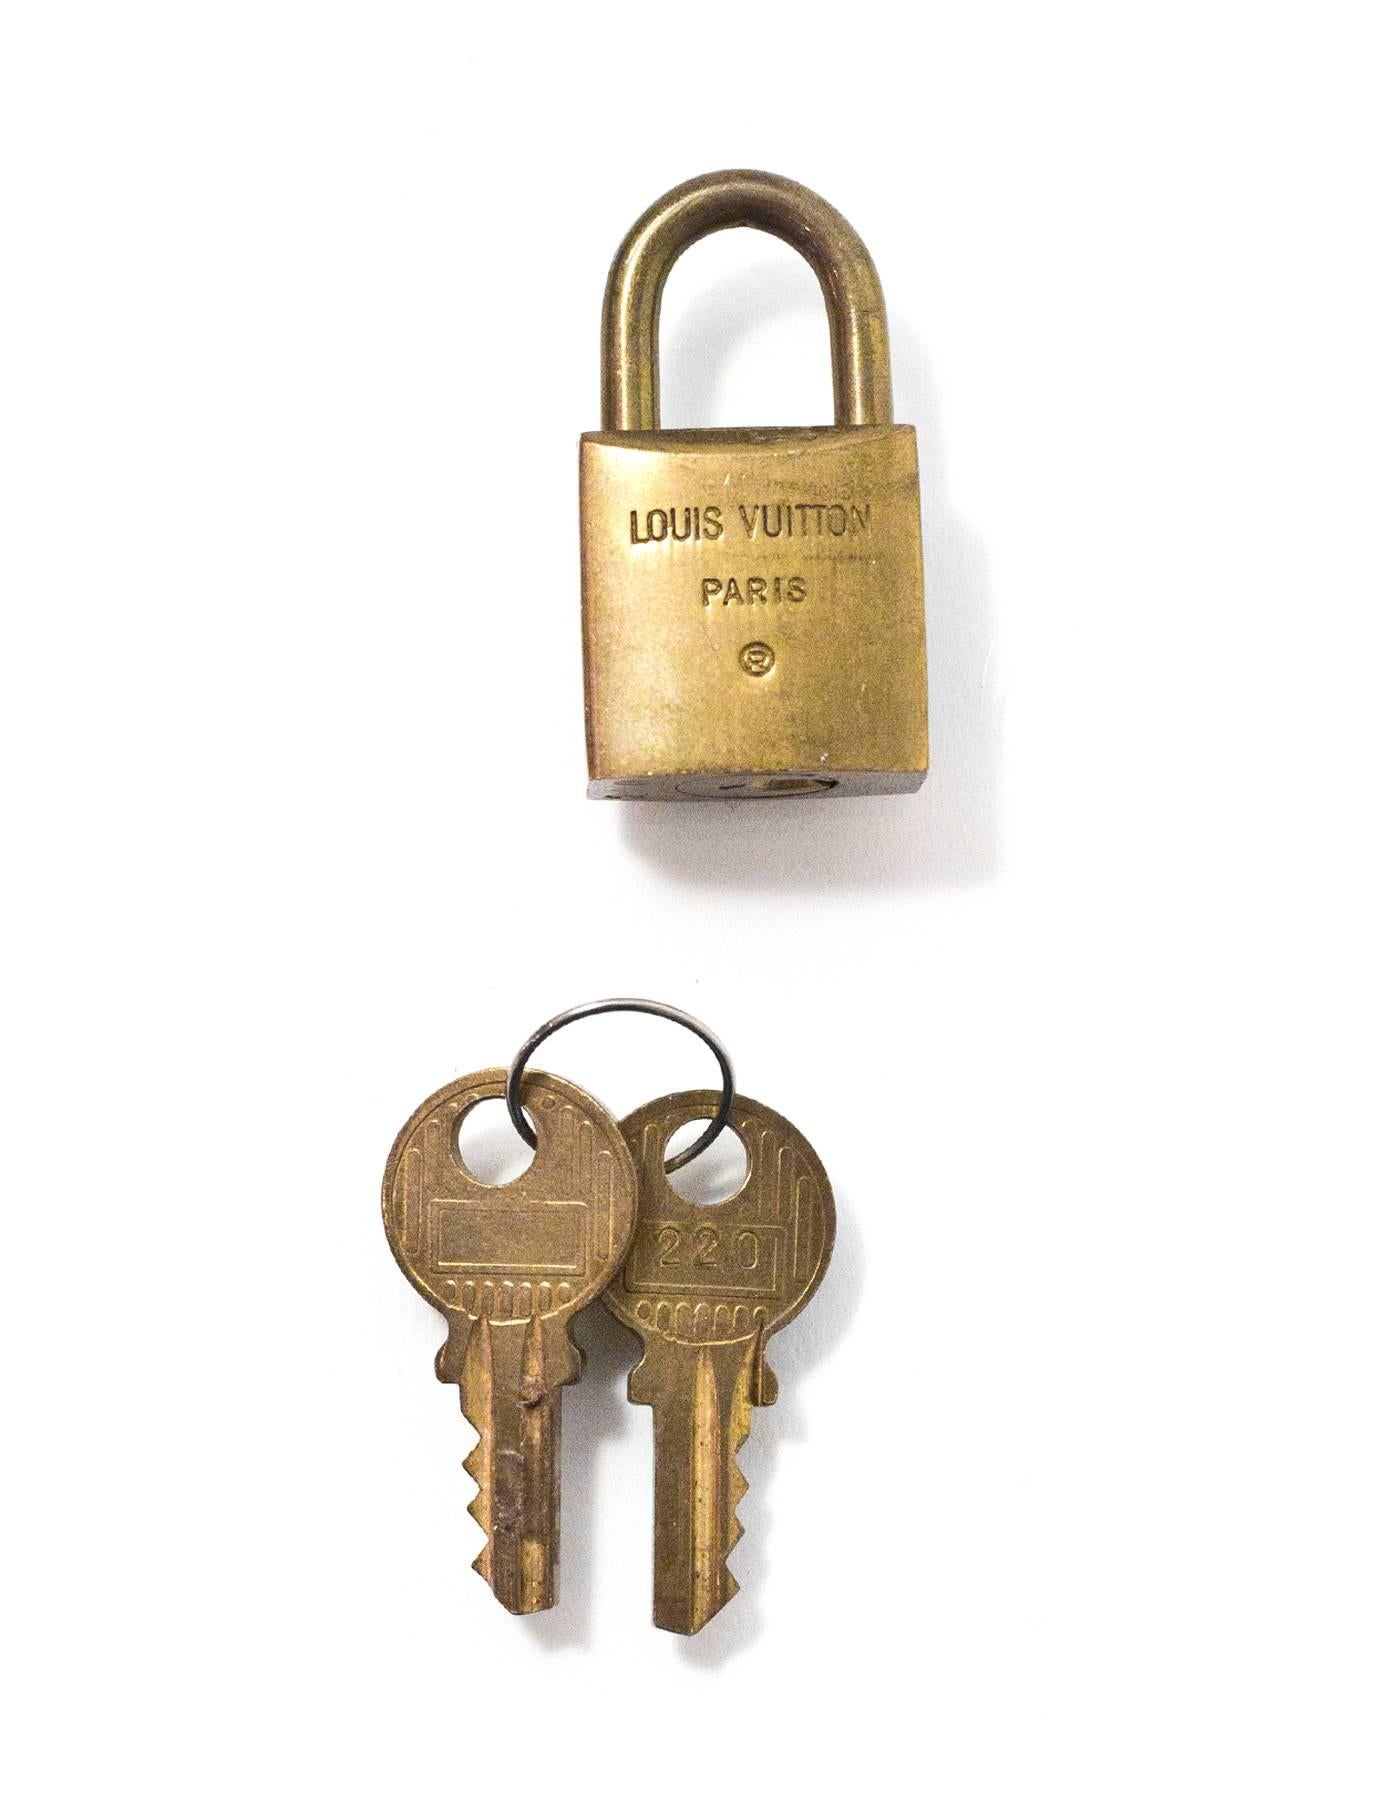 Louis Vuitton Vintage Brass Logo Lock & Keys

Color: Gold
Hardware: Brass
Materials: Metal
Stamp: Louis Vuiton Paris 220
Retail Price: $91 + tax
Overall Condition: Very good good pre-owned condition, light tarnish throughout
Includes: Lock, two